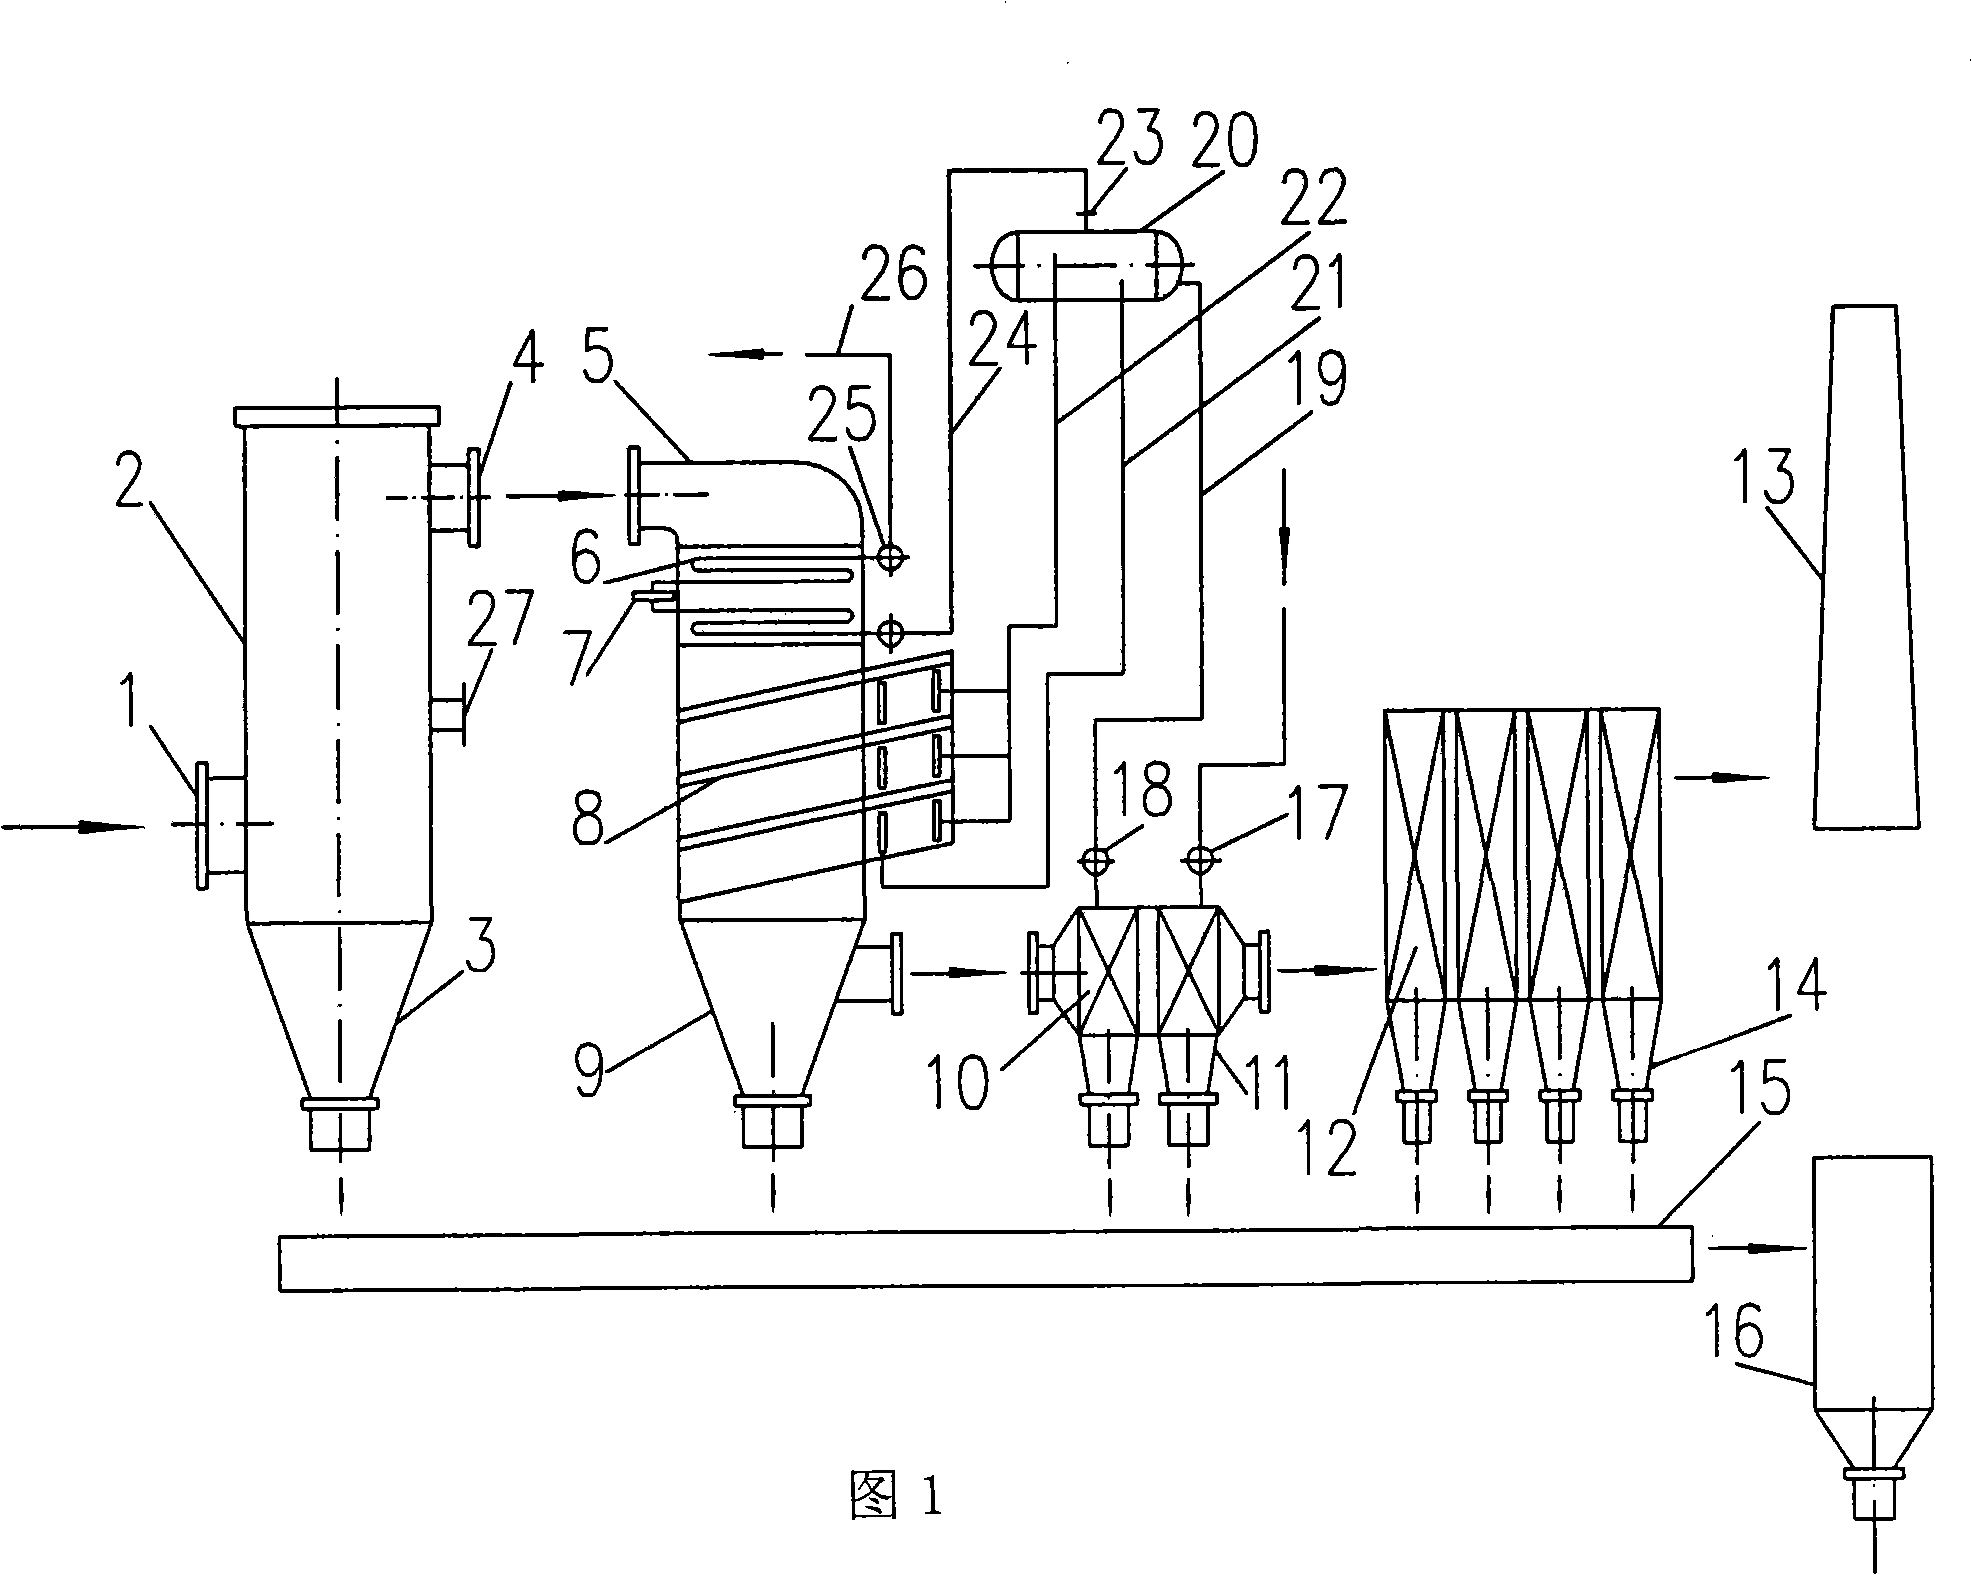 Waste heat recovery from smelting reduction ironmaking in heat pipe type rotary hearth furnace and steam production apparatus